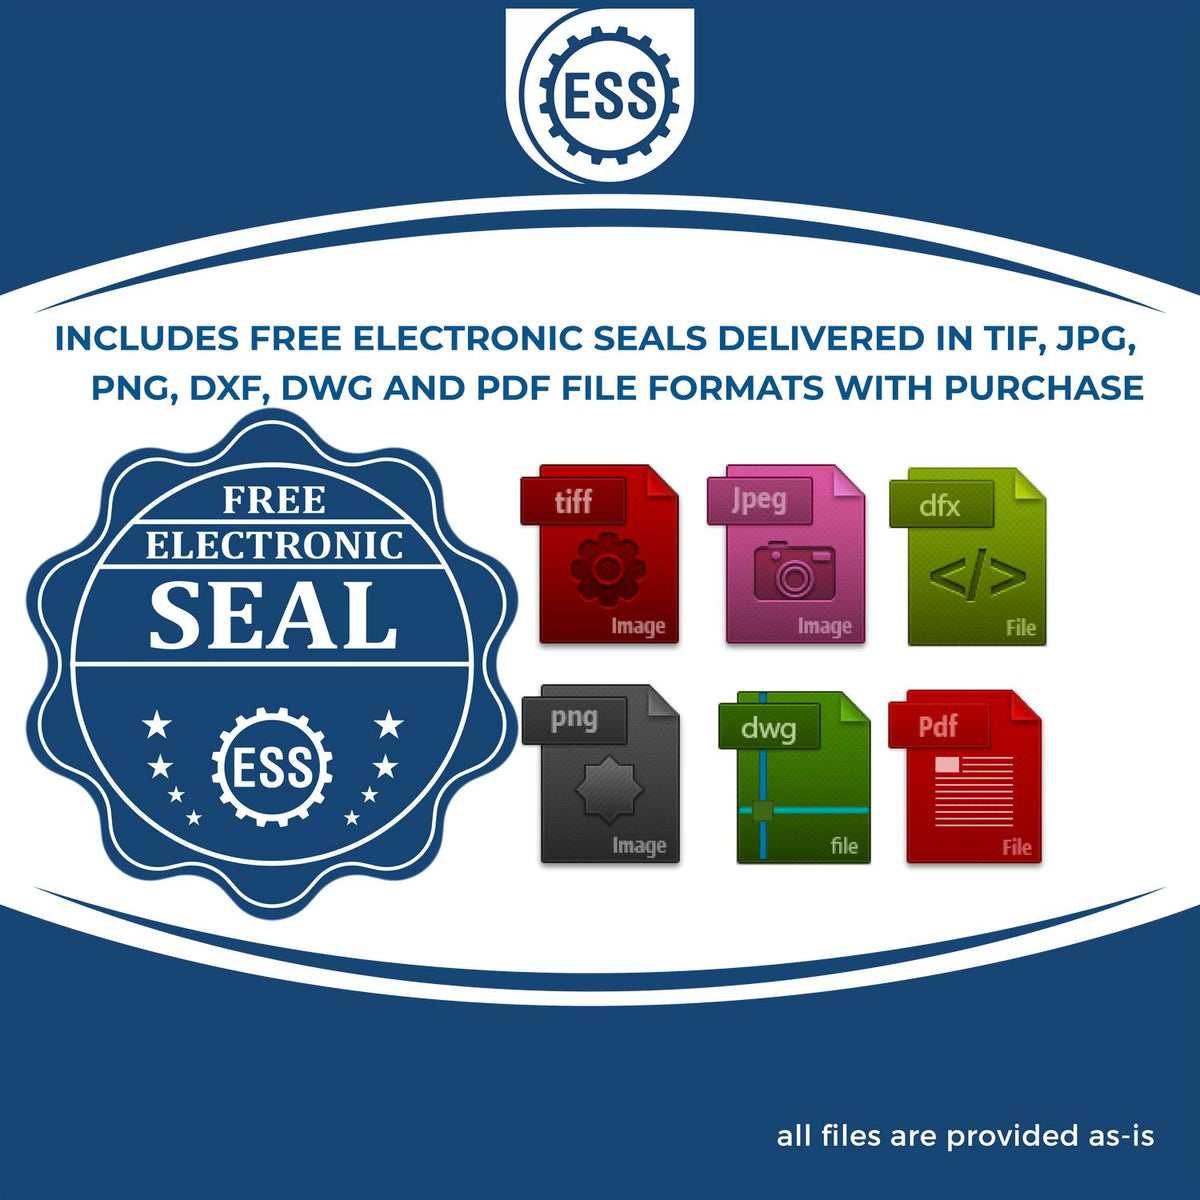 An infographic for the free electronic seal for the Heavy-Duty Utah Rectangular Notary Stamp illustrating the different file type icons such as DXF, DWG, TIF, JPG and PNG.